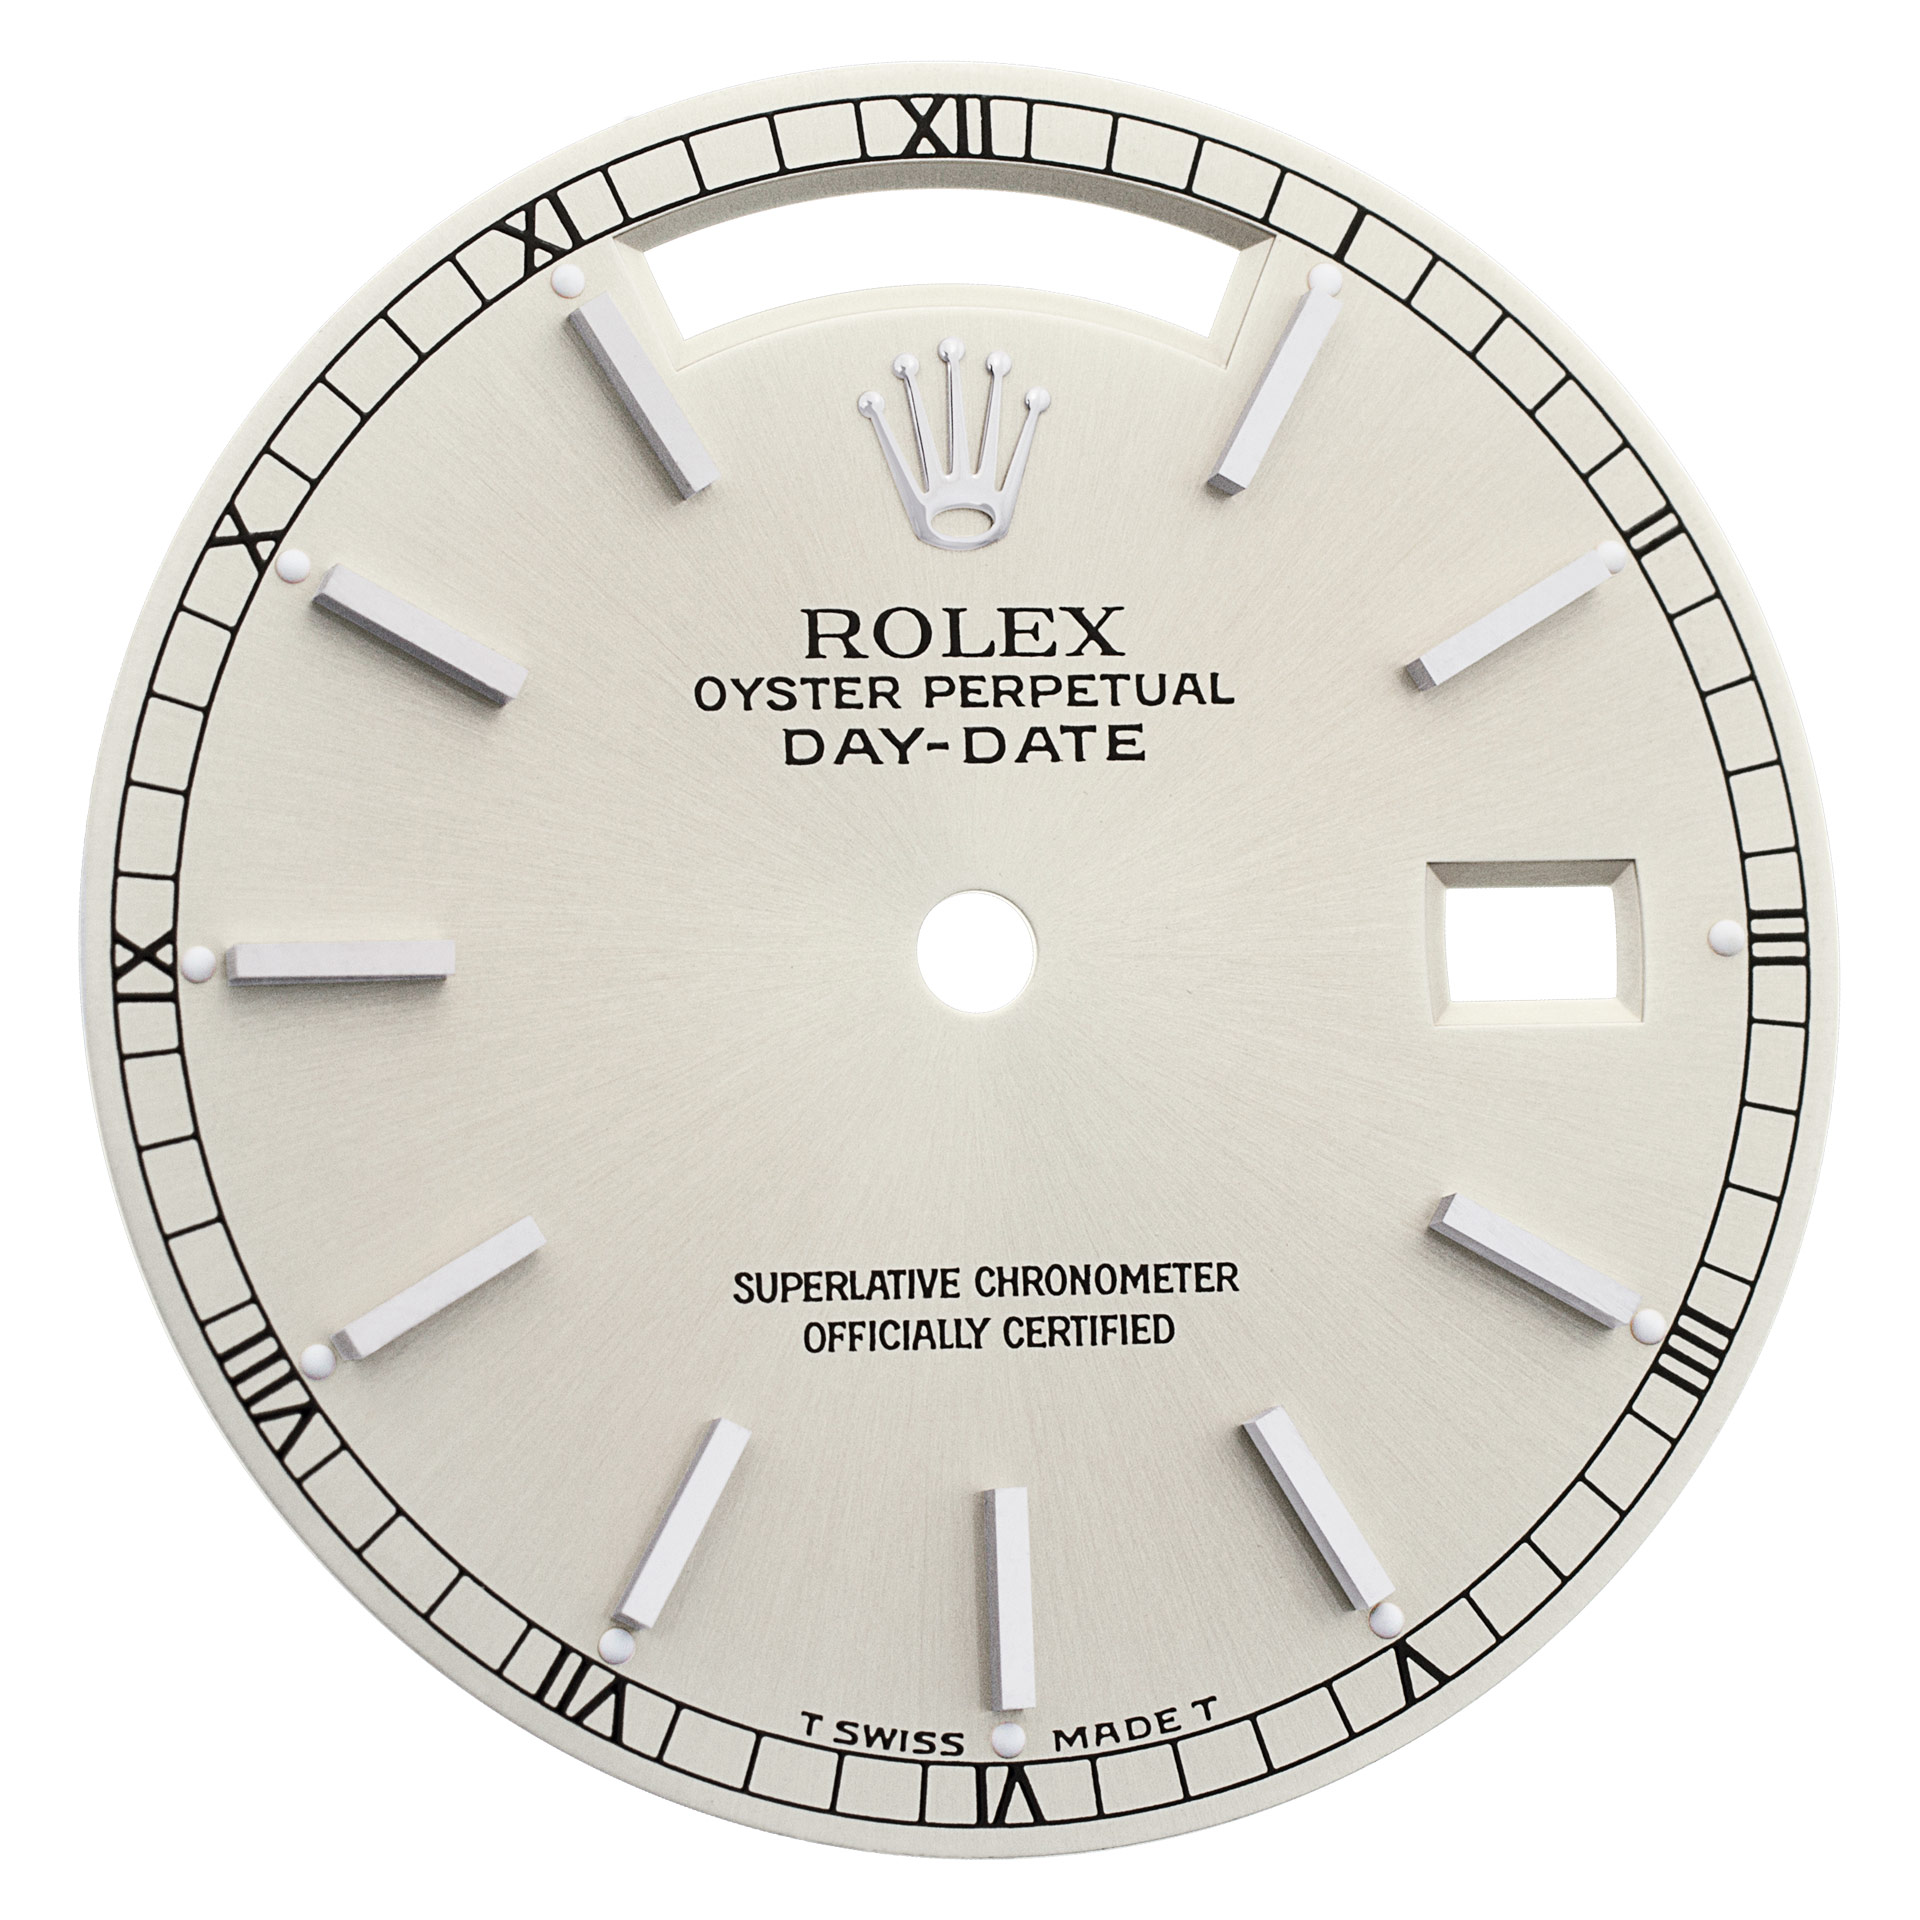 Rolex Day-date silver dial image 1